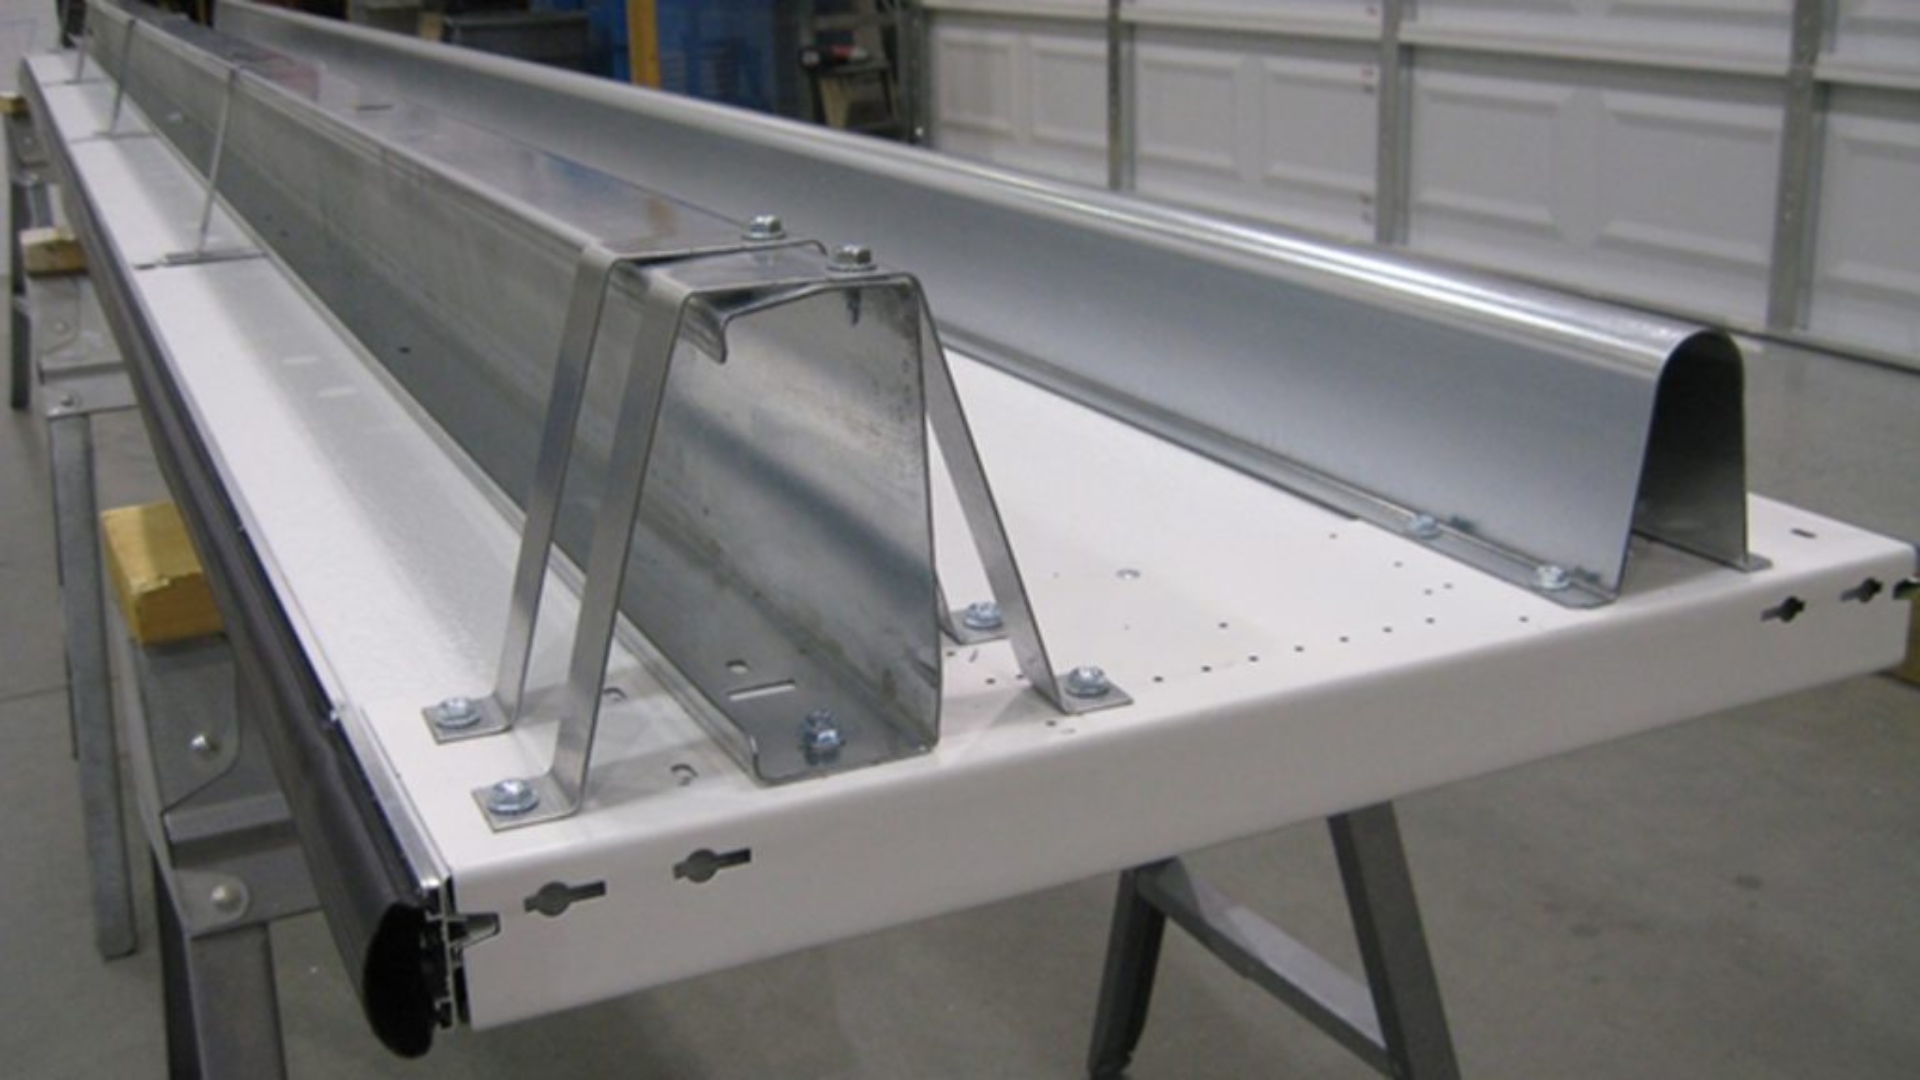 Garage door braces made of steel laid on a table